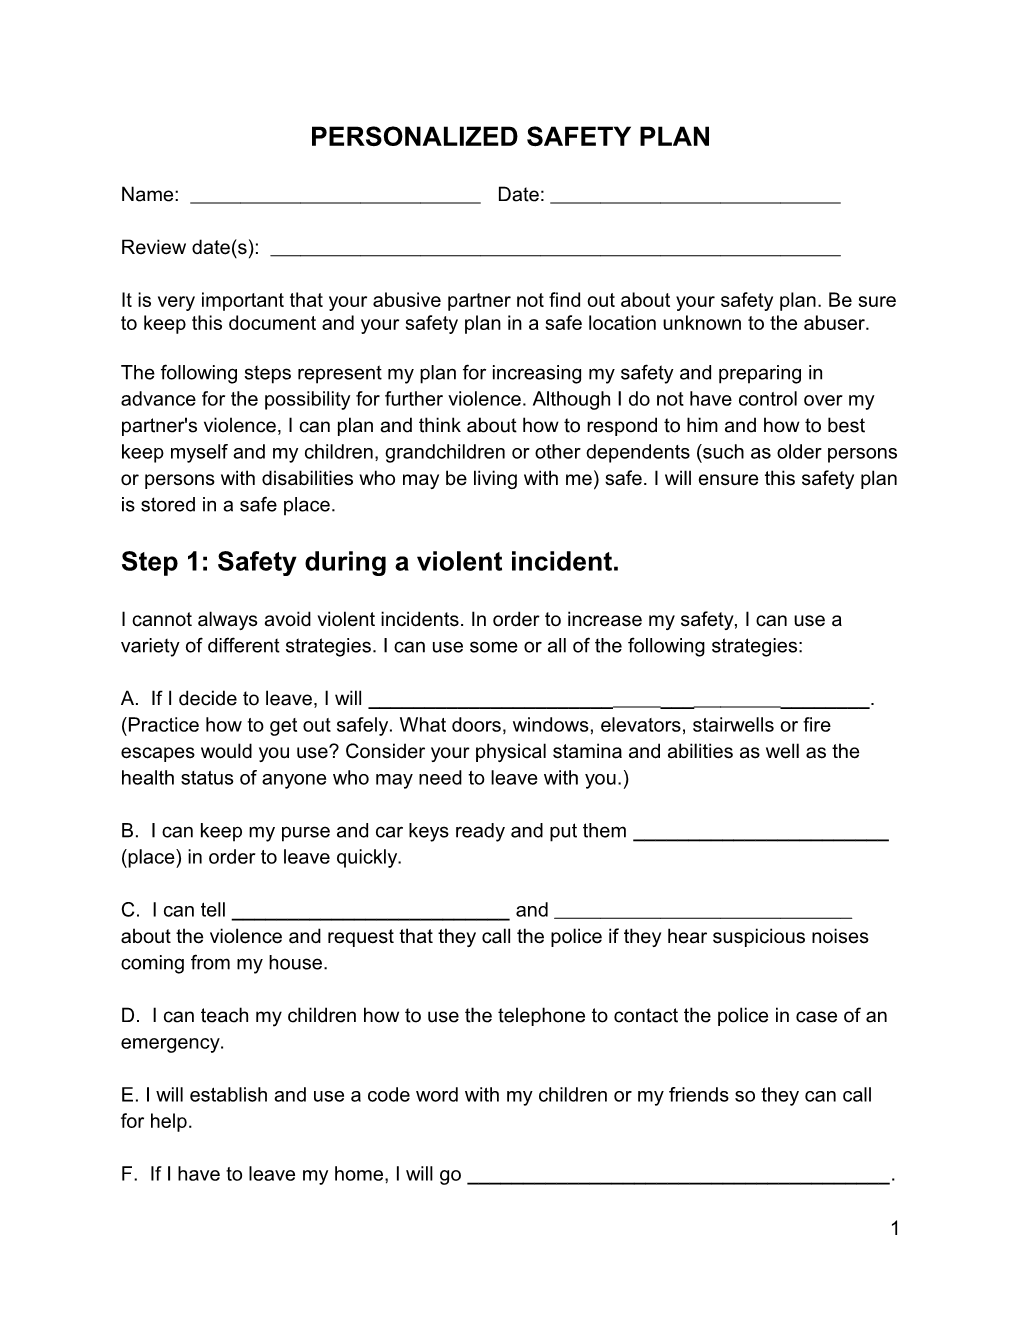 Safety Planning Resources - Personalized Safety Planning Template